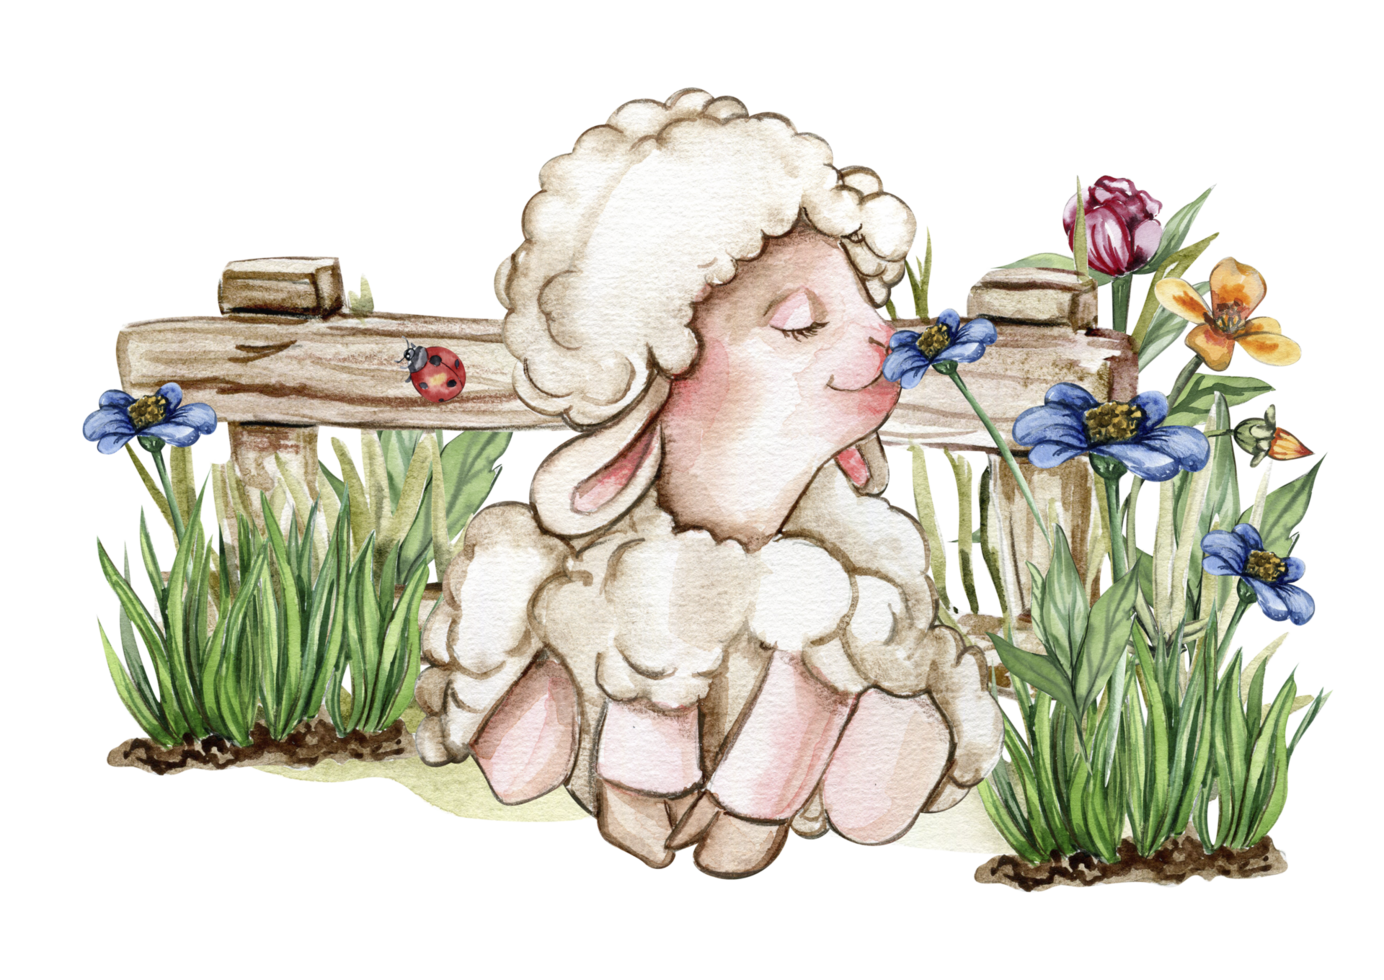 White fluffy sheep sitting in the grass with flowers and butterflies next to wooden fence. Watercolor hand drawn illustration of farm baby animal . Perfect for greetings card, poster, fabric pattern. png